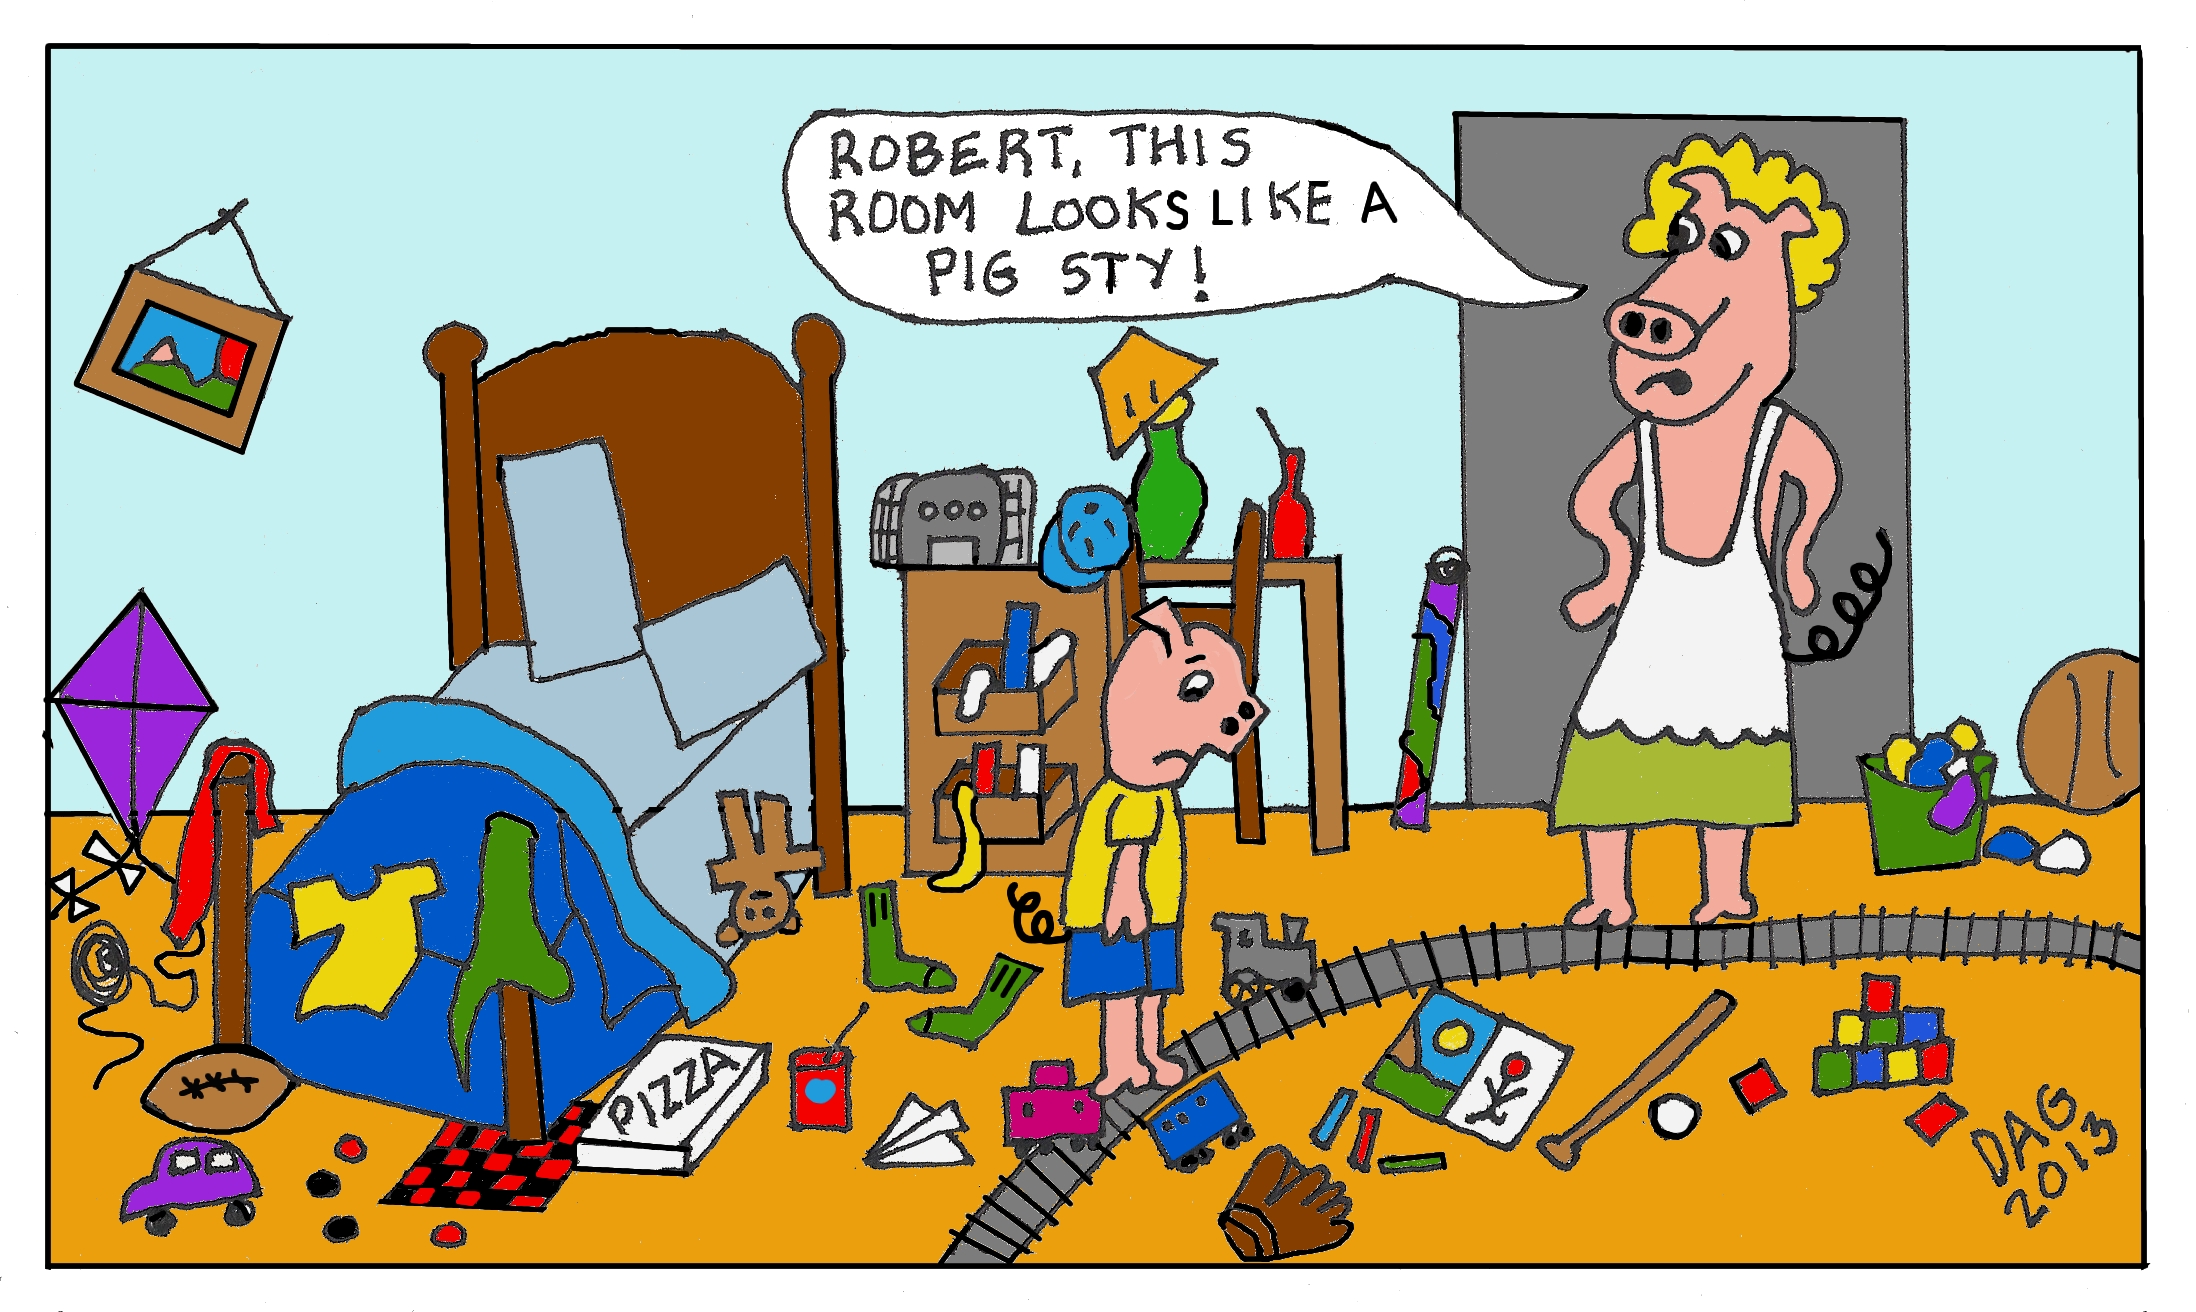 Cleaning up the mess. Clean up the Room. Tidy Room and messy Room. Tidy Room cartoon. Clean your Room.